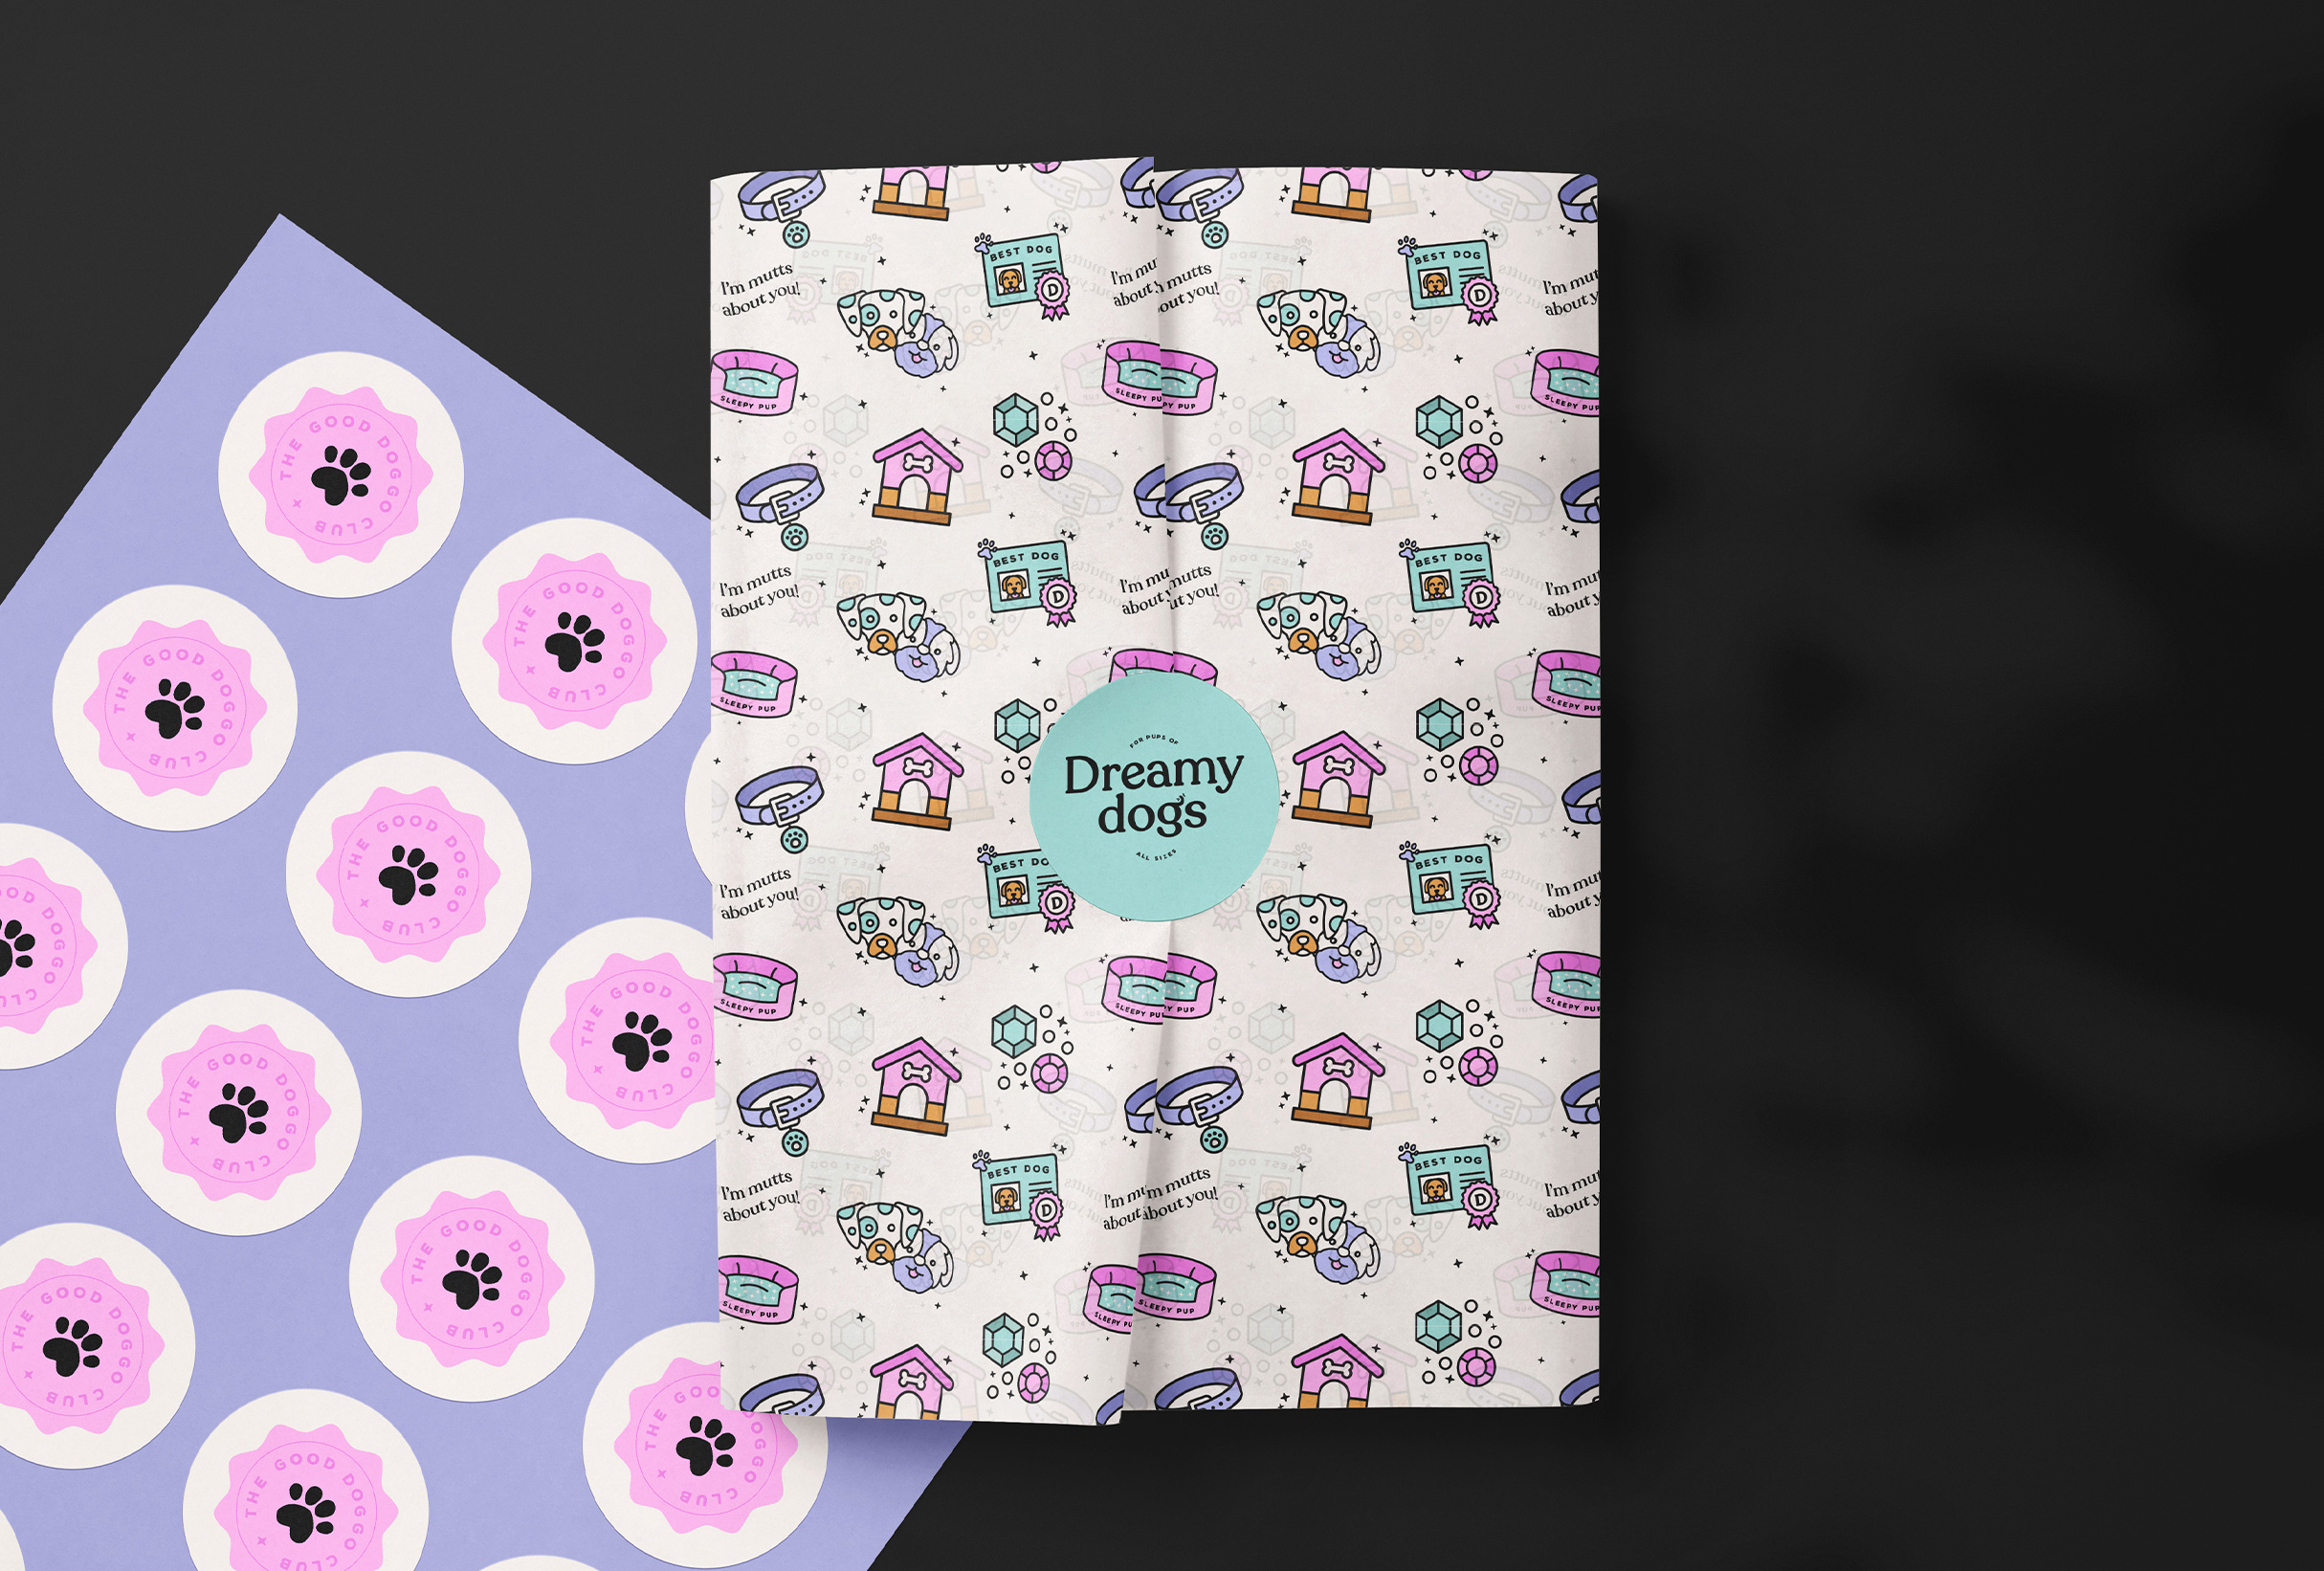 Packaging design for Dreamy Dogs, for pups of all shapes and sizes - designed by Wiltshire-based graphic designer